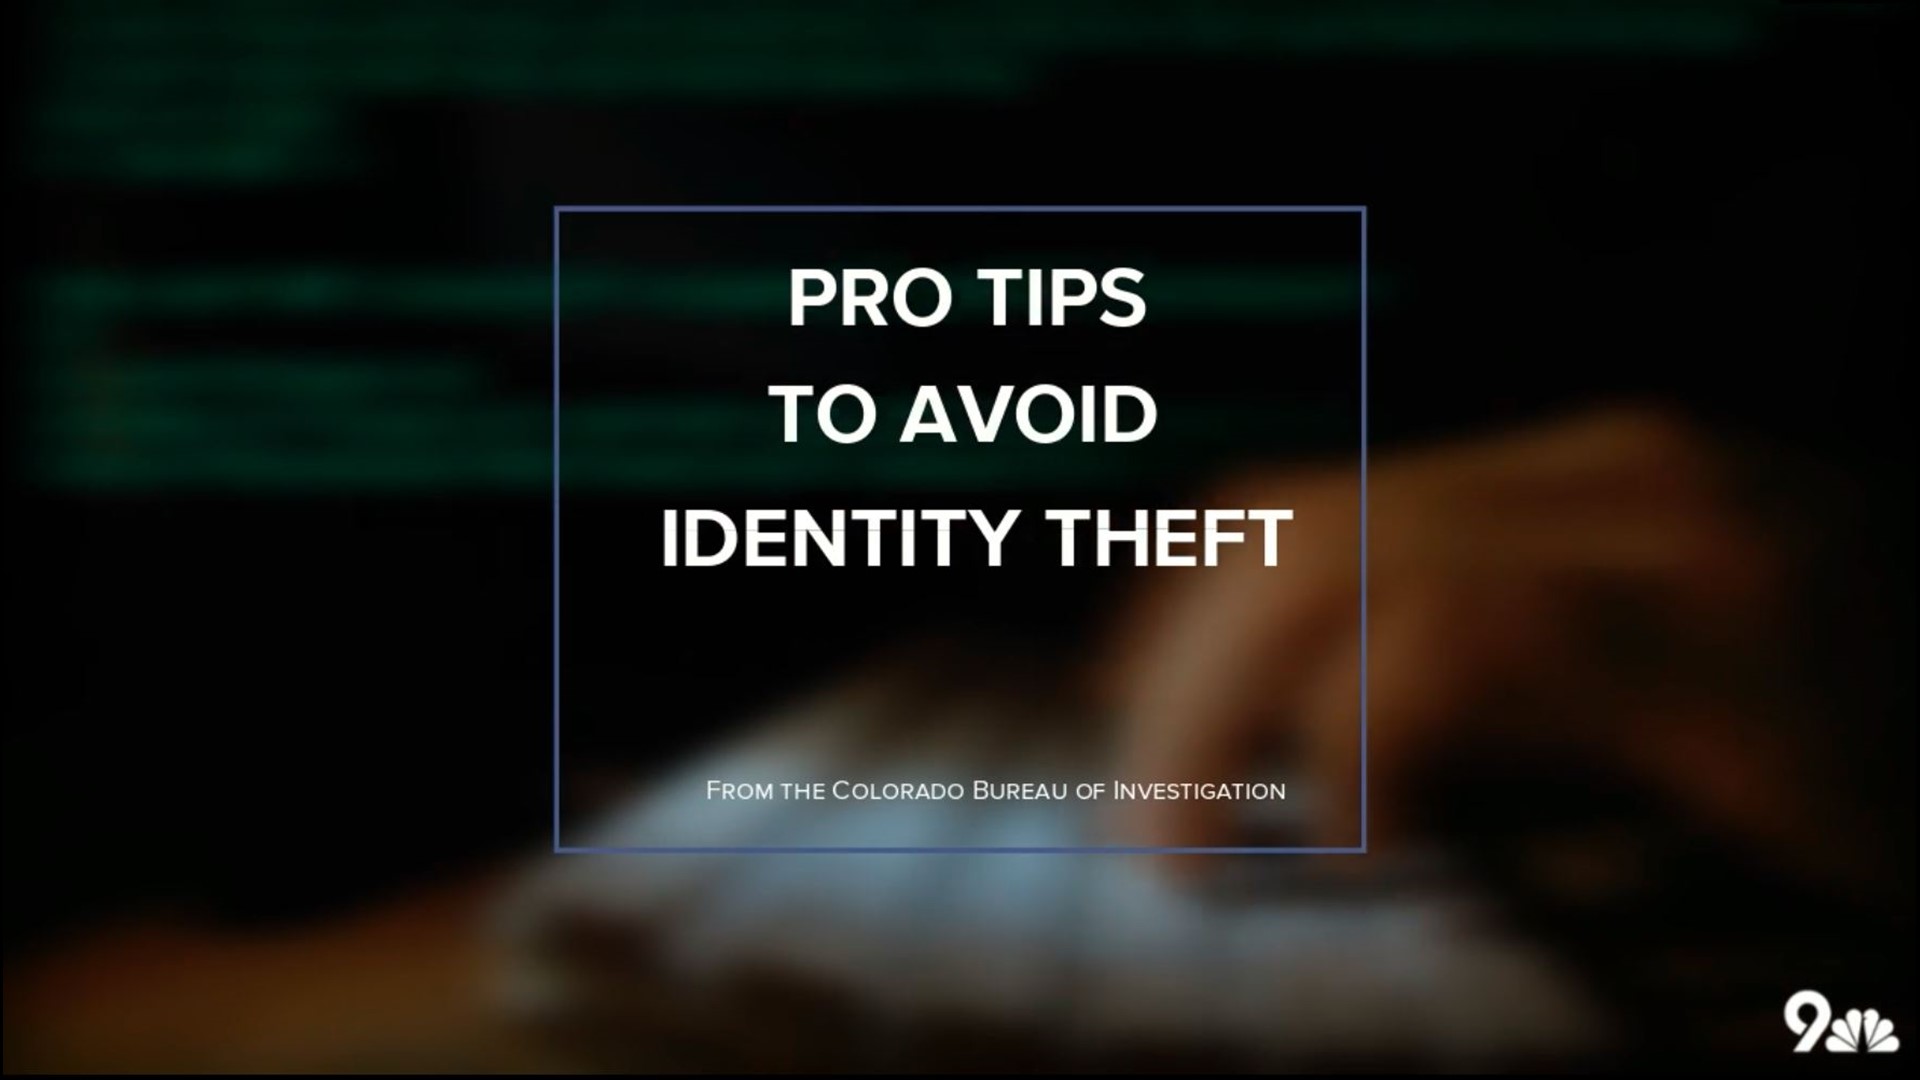 There are some basic things the Colorado Bureau of Investigation says you can do to help lessen the chances of having your identity stolen.